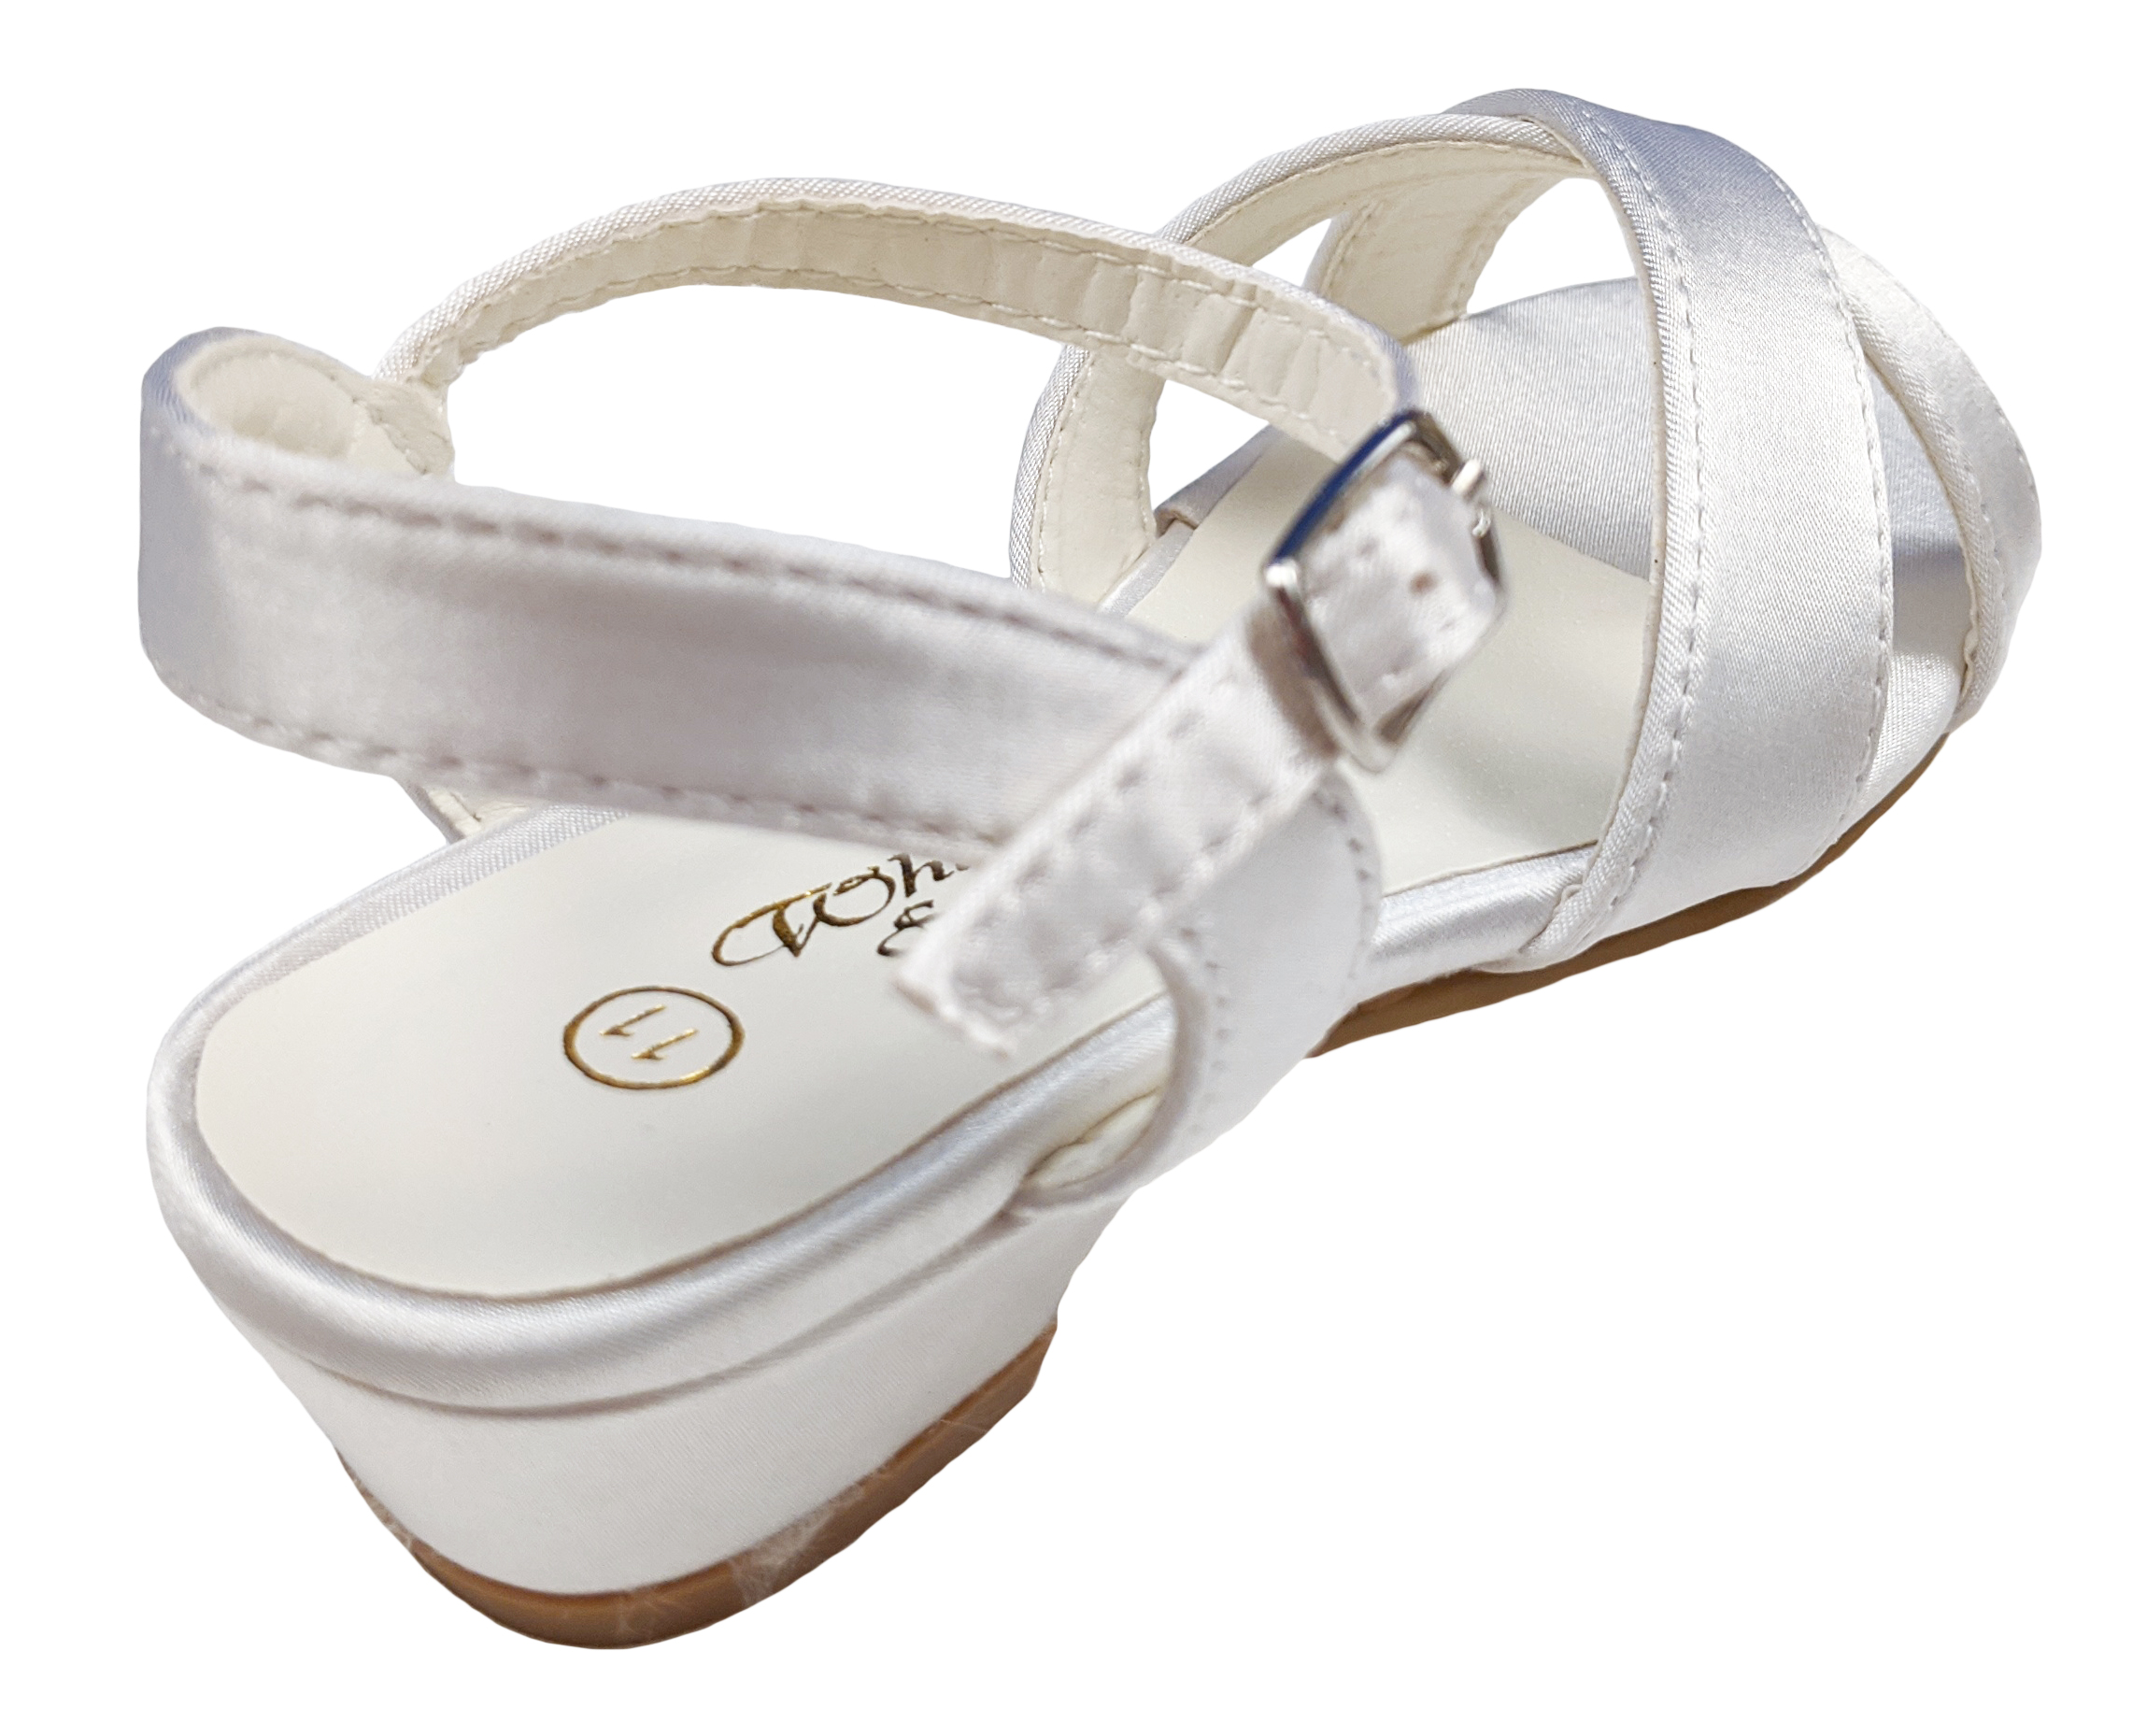 Little Things Mean A Lot Girls White Satin Dress Sandals with Heel (Little Girl, Big Girl) - image 2 of 6